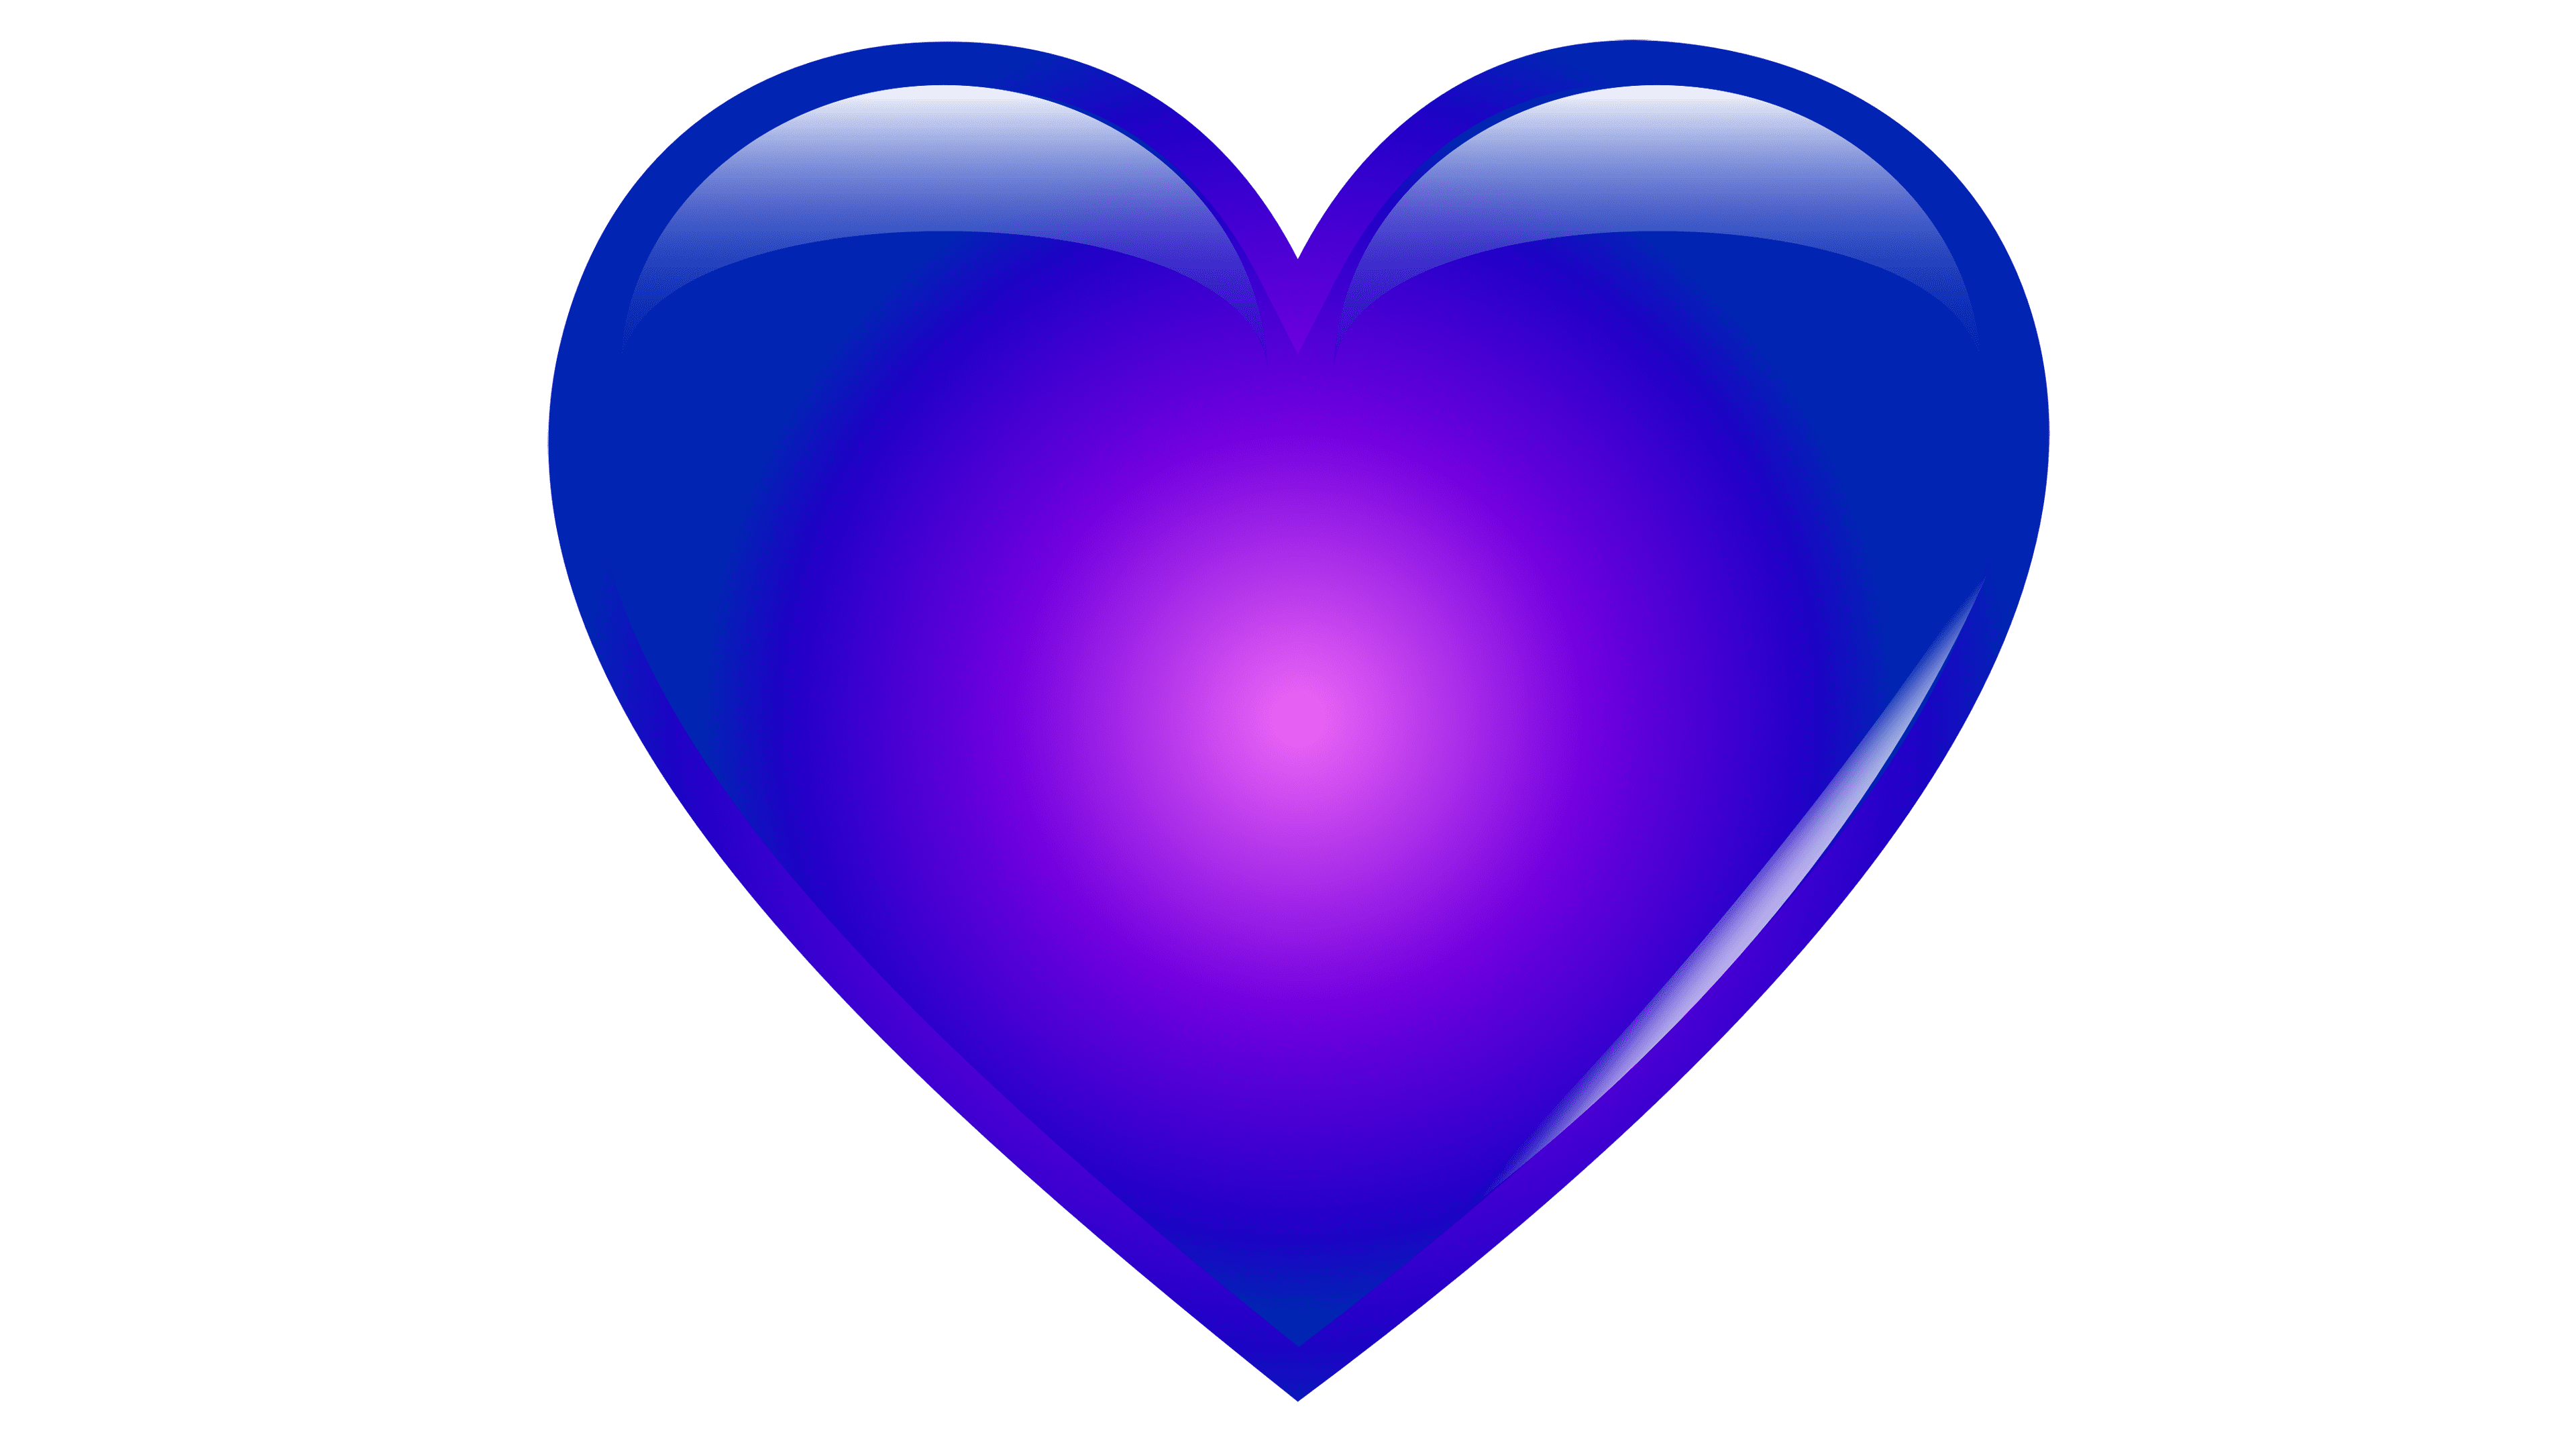 Blue Heart Emoji Meaning - what it means and how to use it